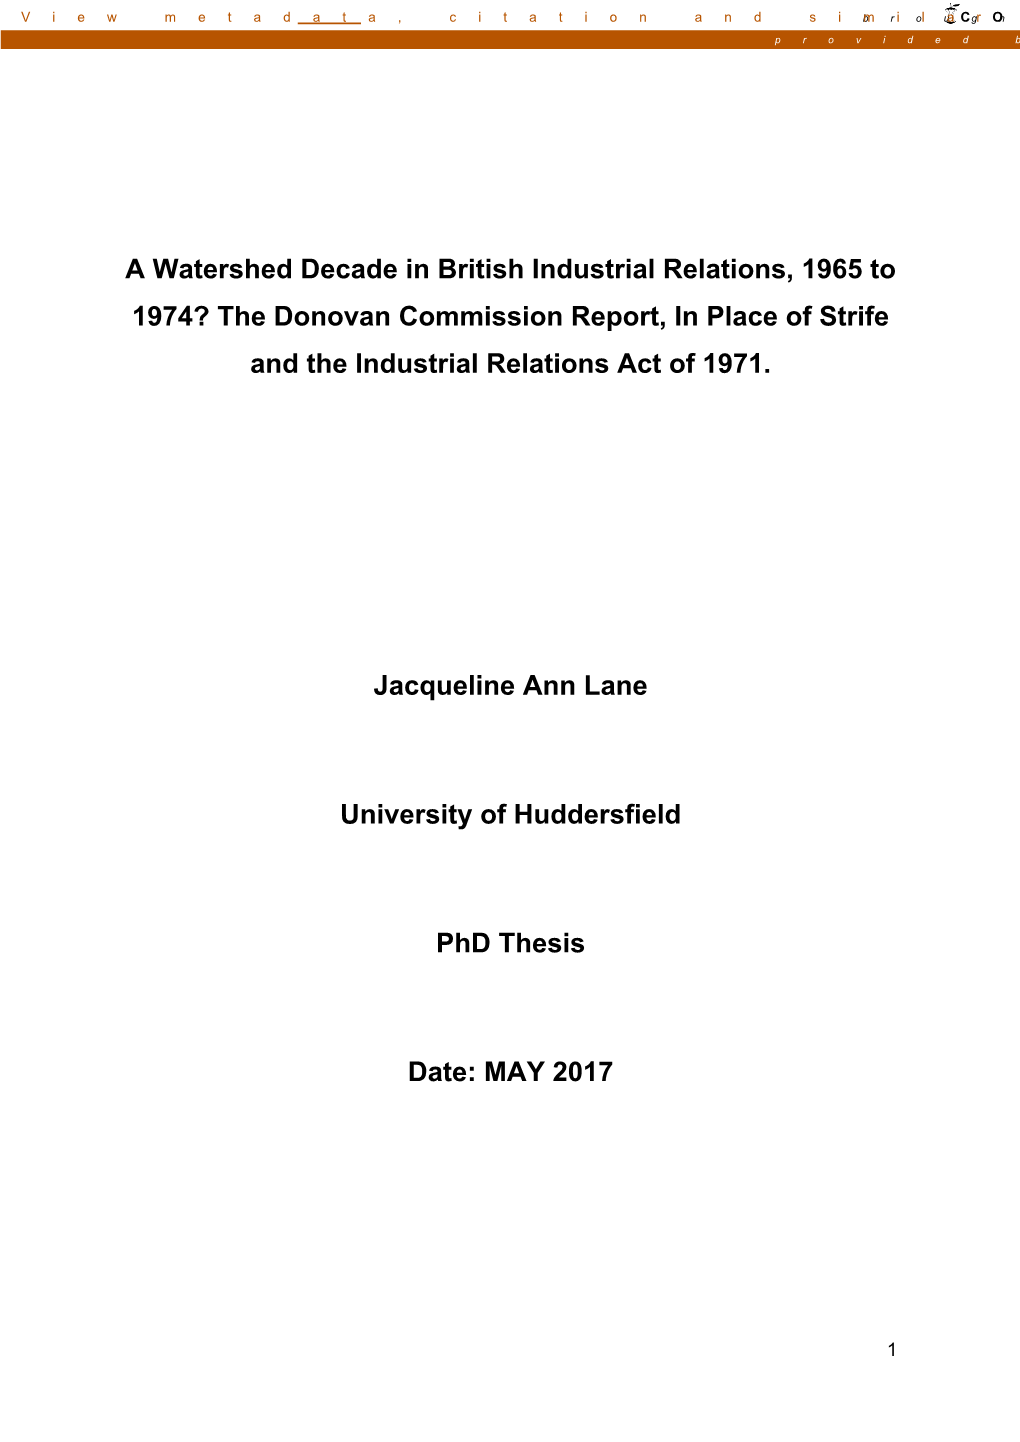 A Watershed Decade in British Industrial Relations, 1965 to 1974? the Donovan Commission Report, in Place of Strife and the Industrial Relations Act of 1971